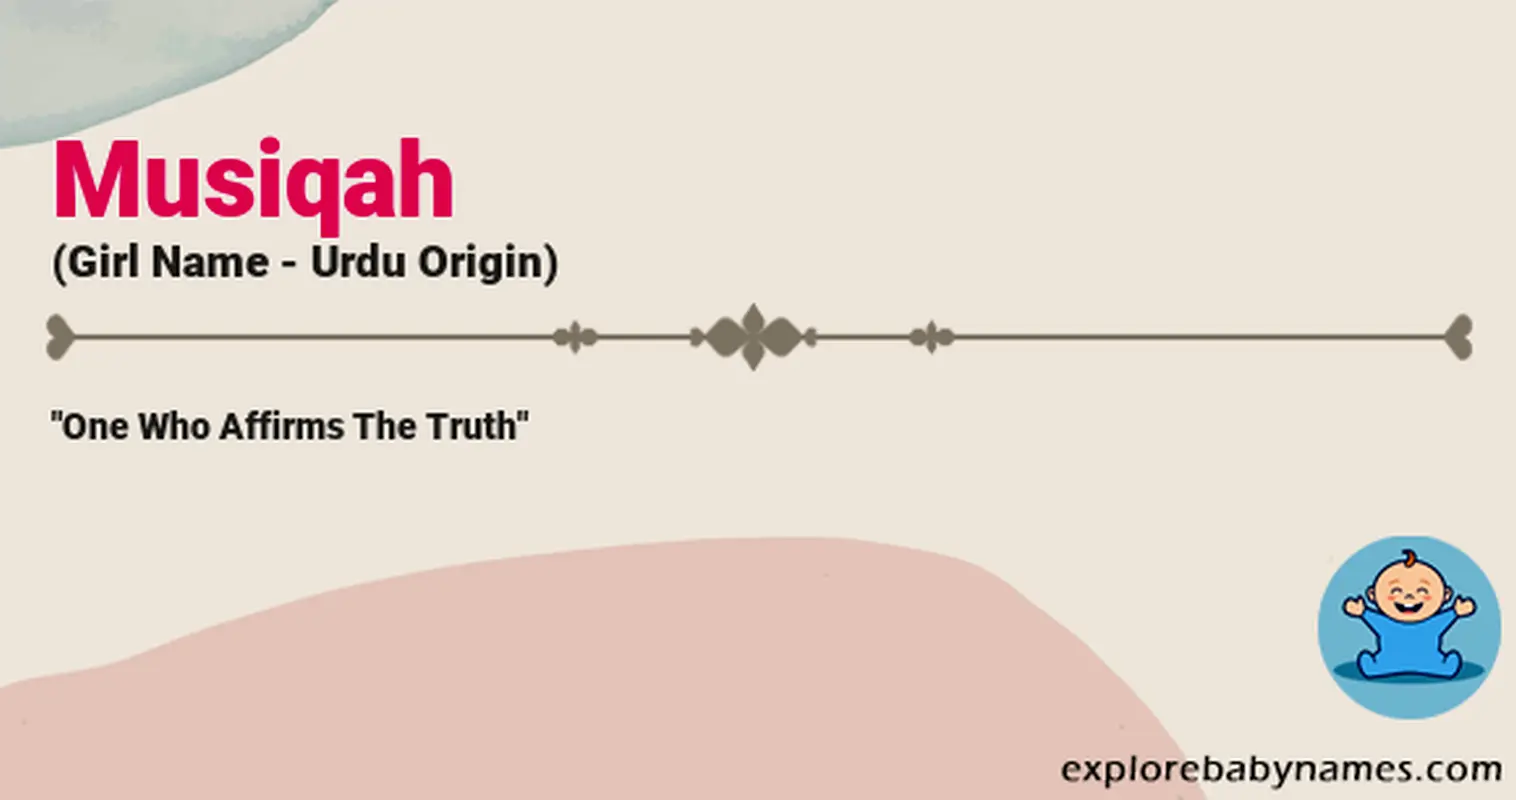 Meaning of Musiqah